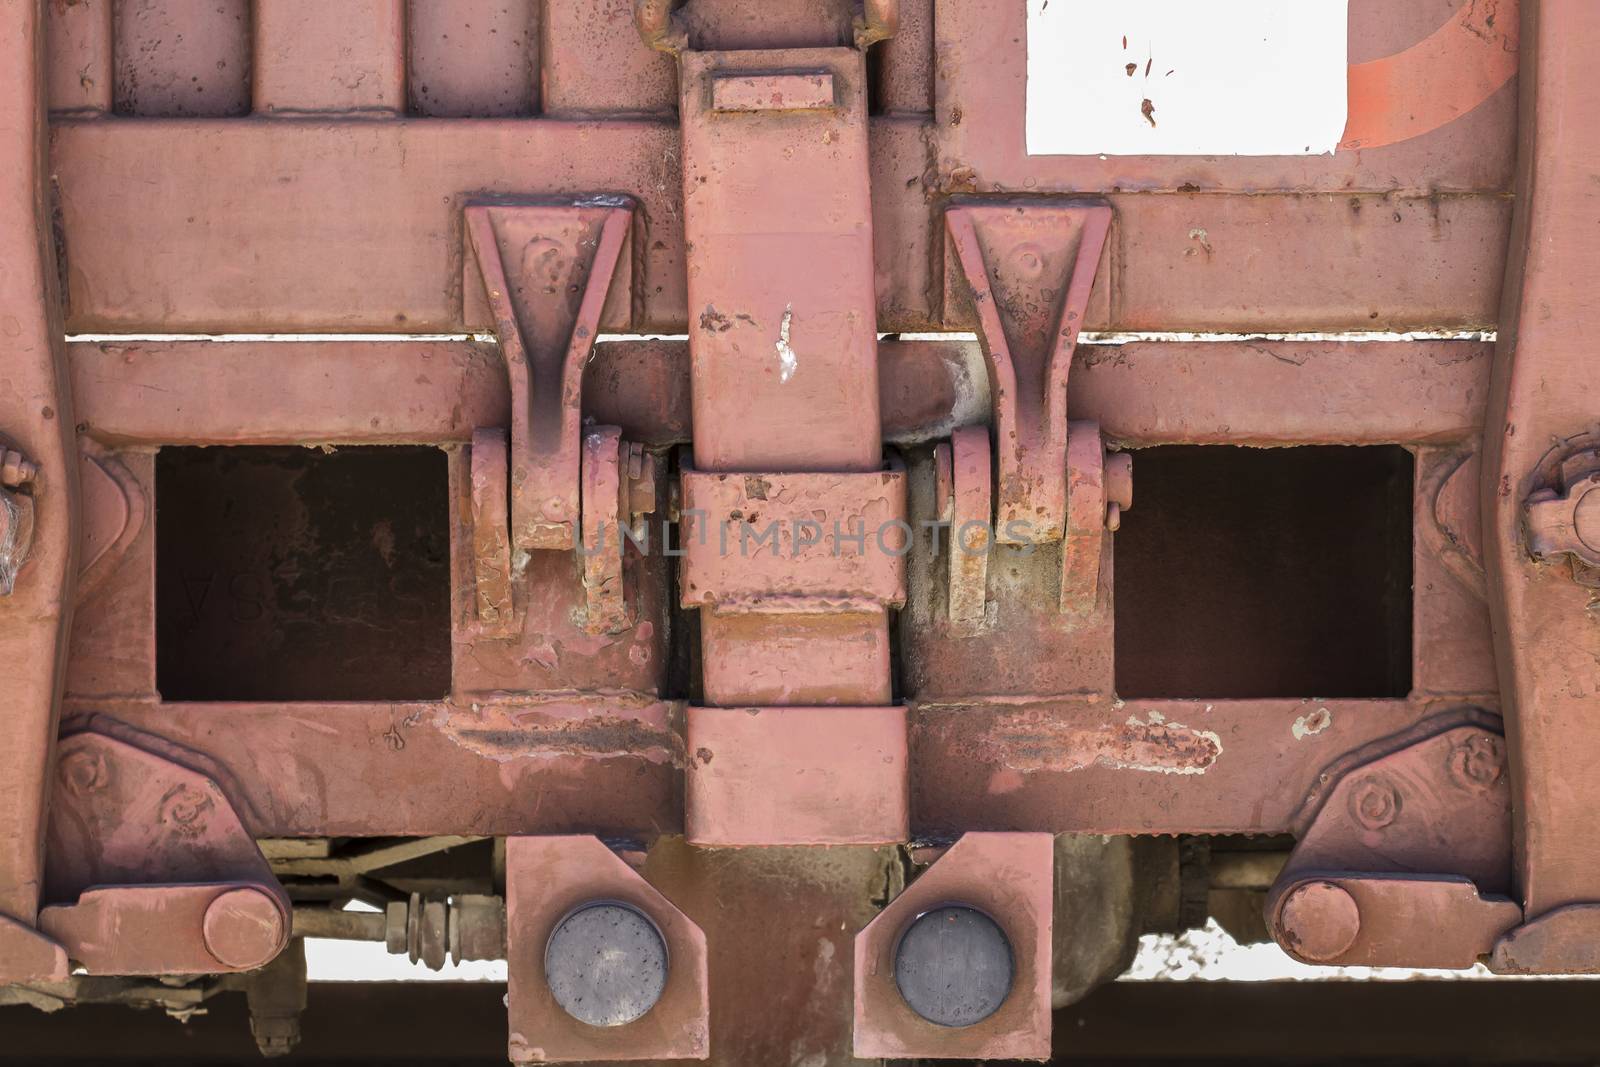 railway, old freight train, metal machinery details